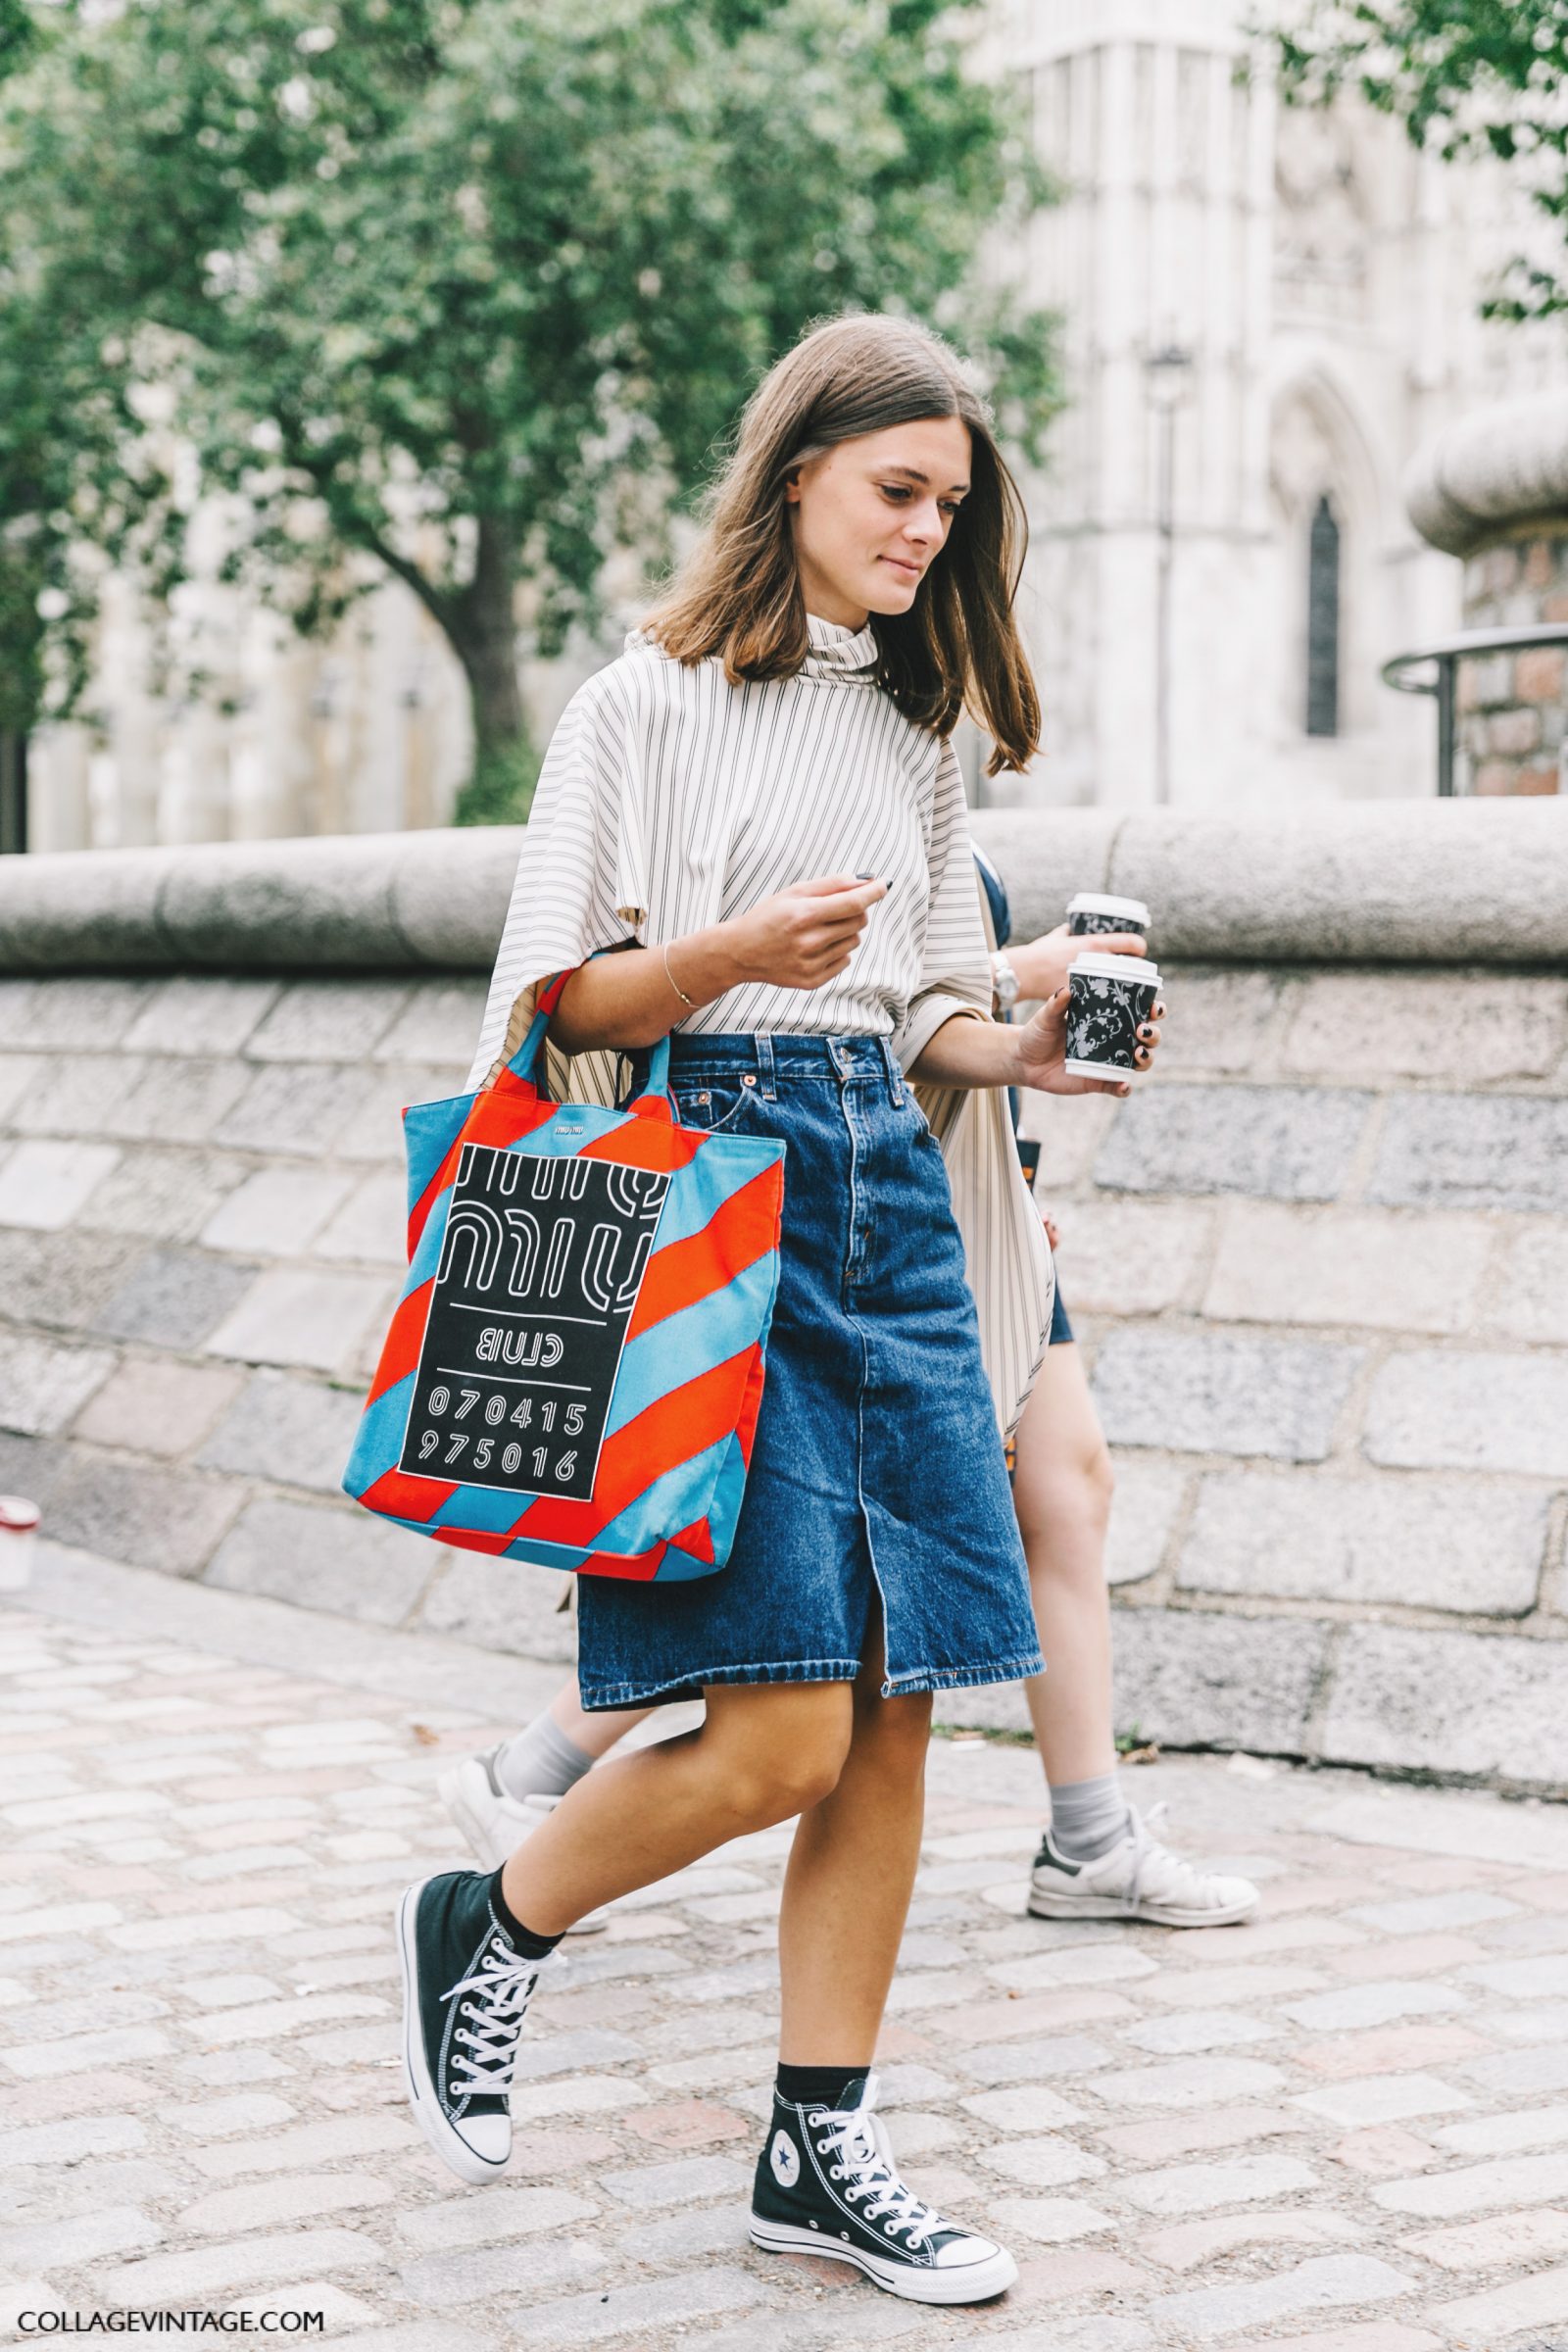 lfw-london_fashion_week_ss17-street_style-outfits-collage_vintage-vintage-topshop_unique-anya-mulberry-preen-50